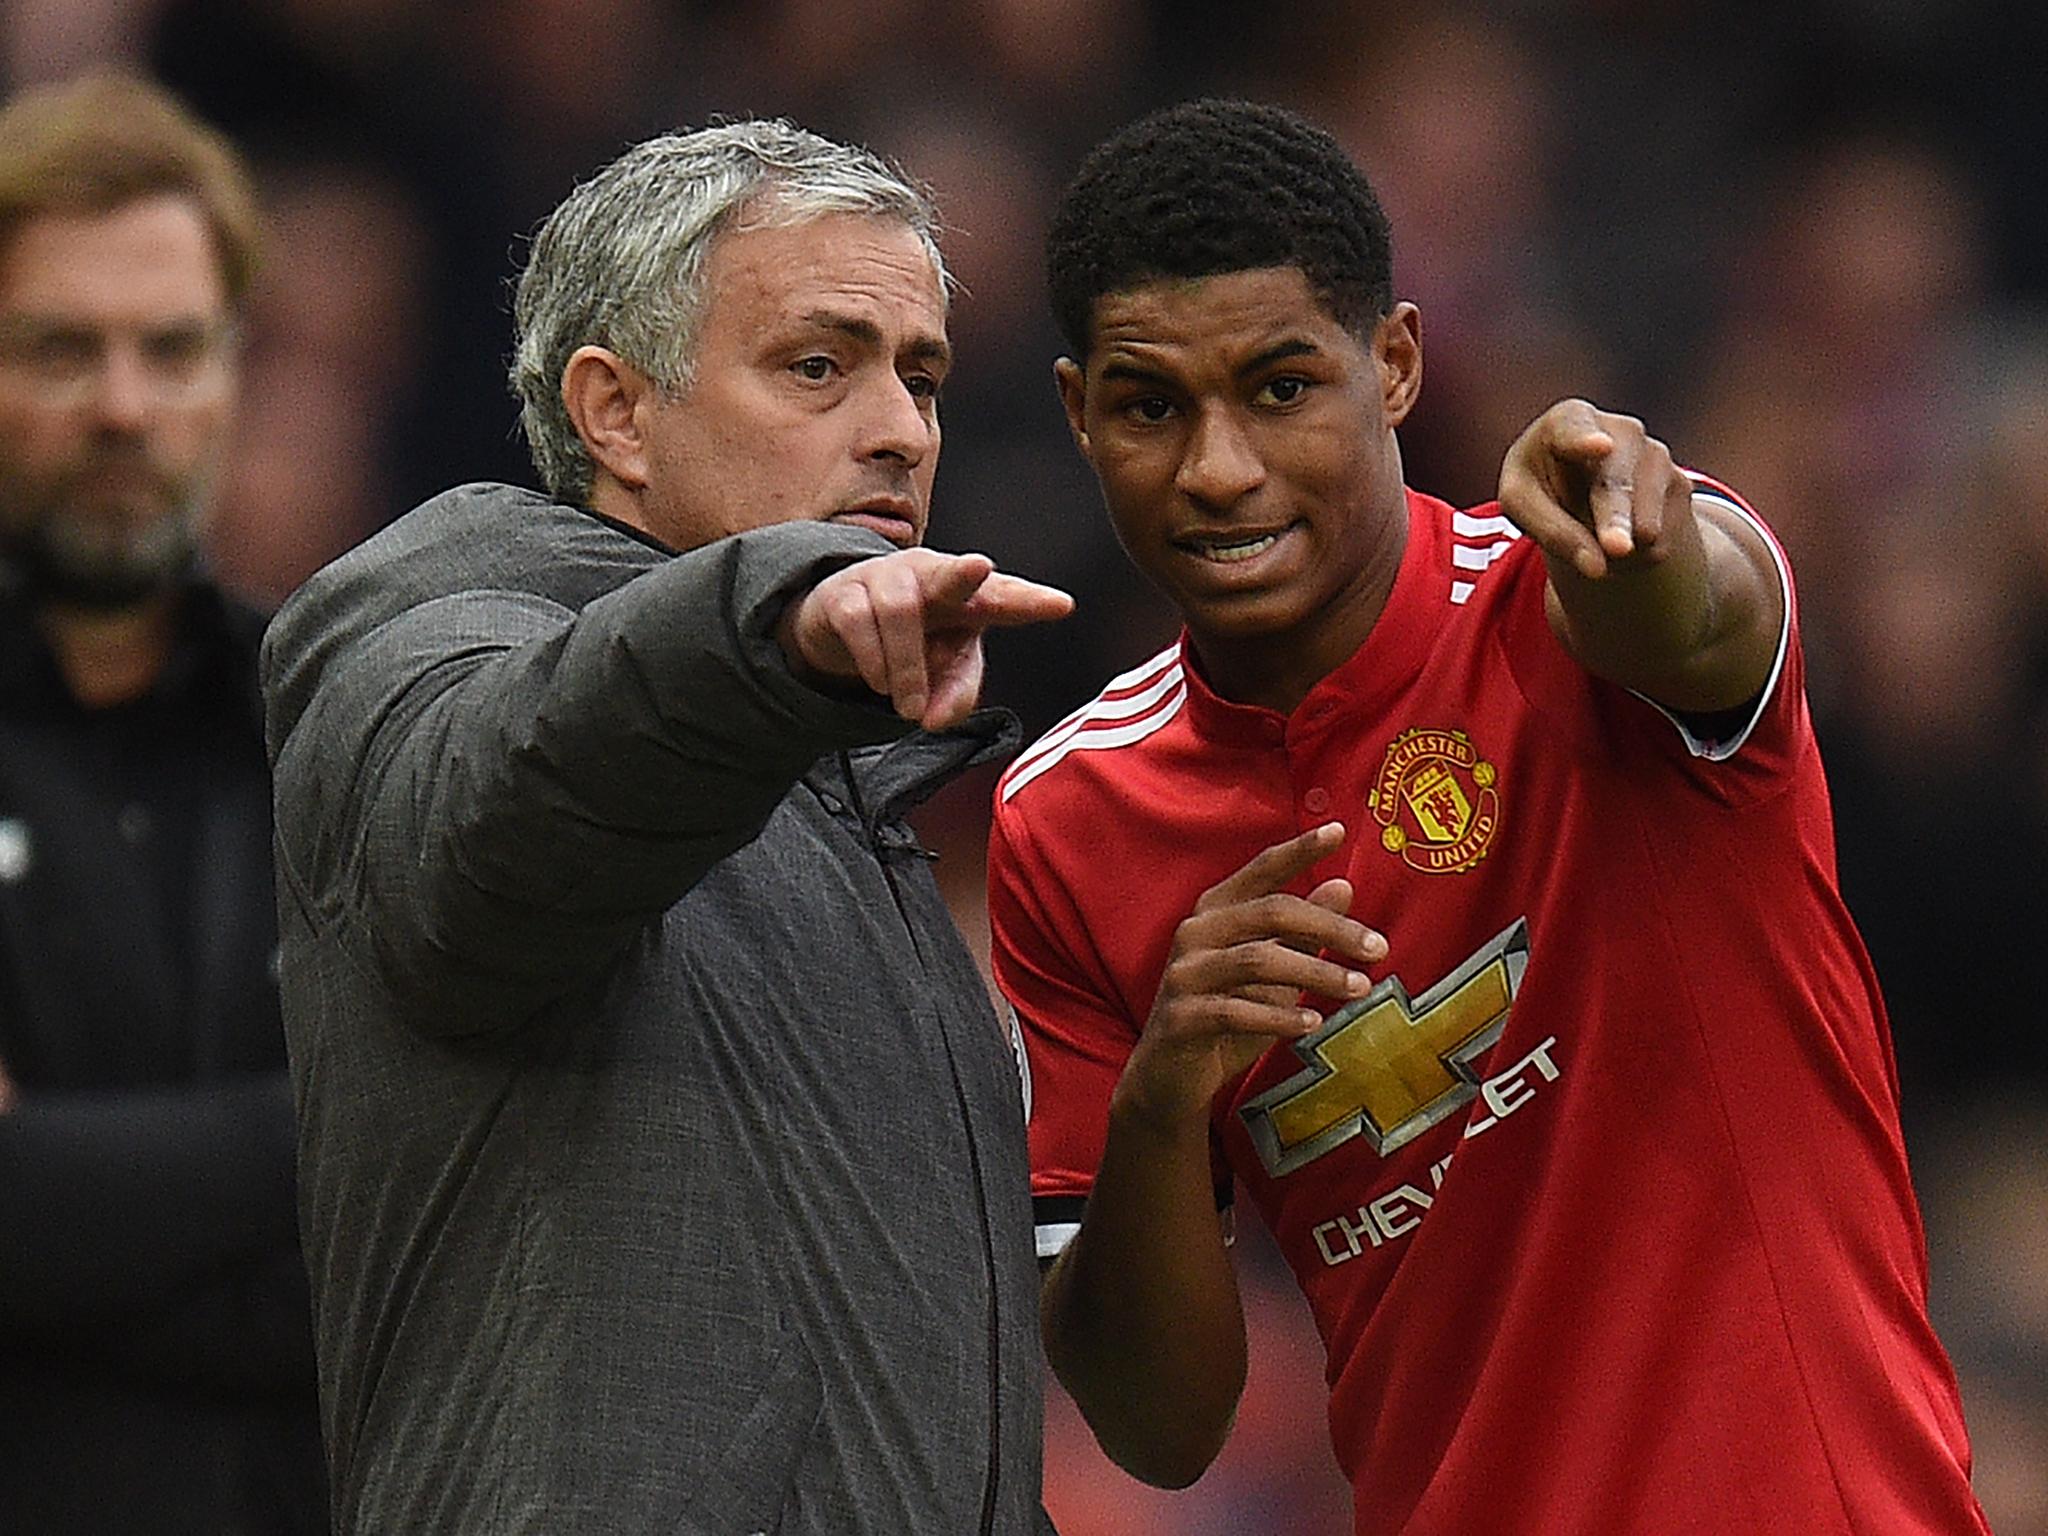 Jose Mourinho has been criticised by Jermaine Jenas for his comments about Marcus Rashford